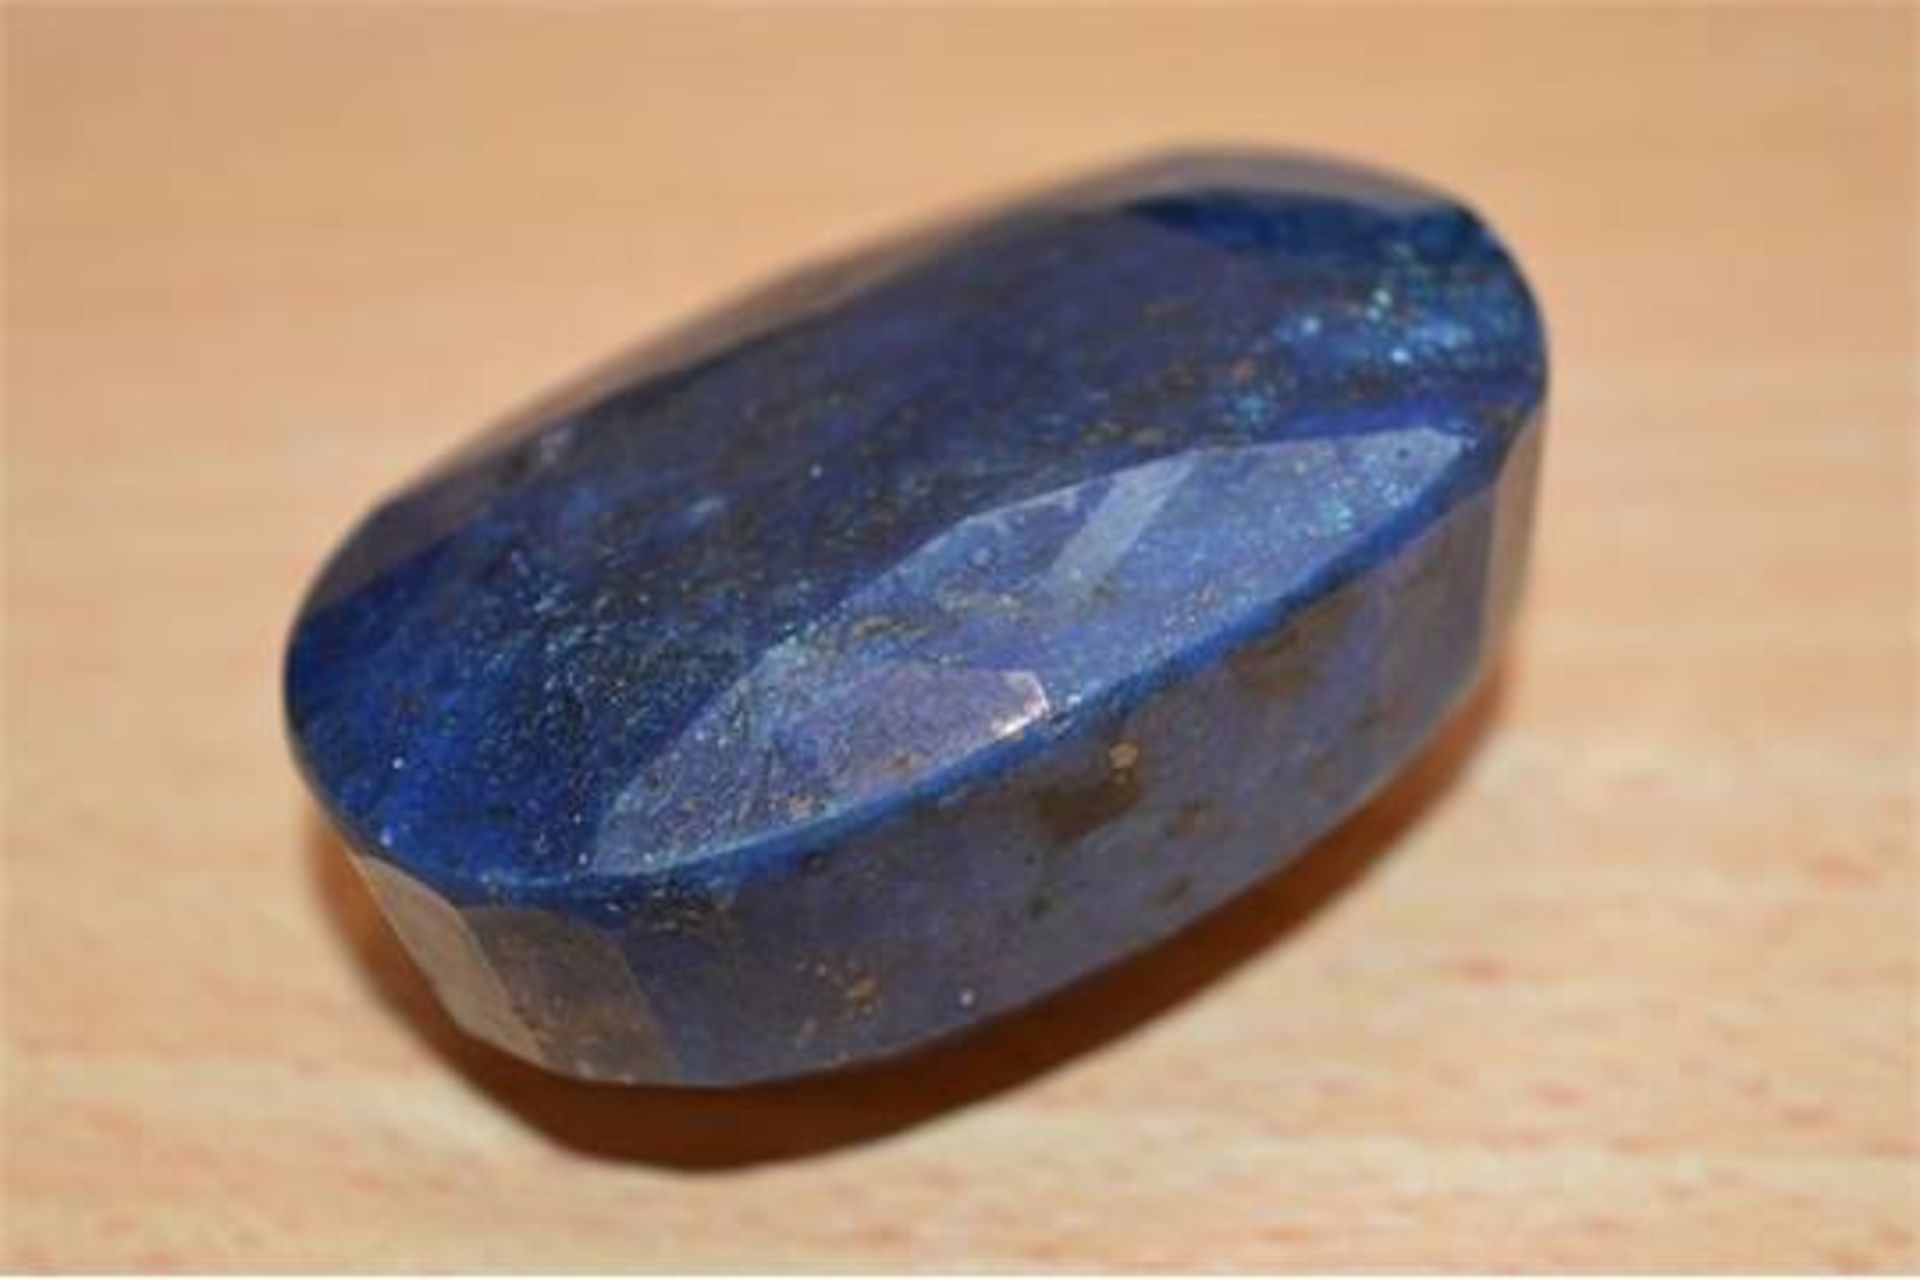 ** IDENTITY: BLUE SAPPHIRE, MMTS: 55.29X33.97X27.39MM, CARATS/COUNTS: 639.15CTS, SHAPE OVAL (FACTED) - Image 2 of 3